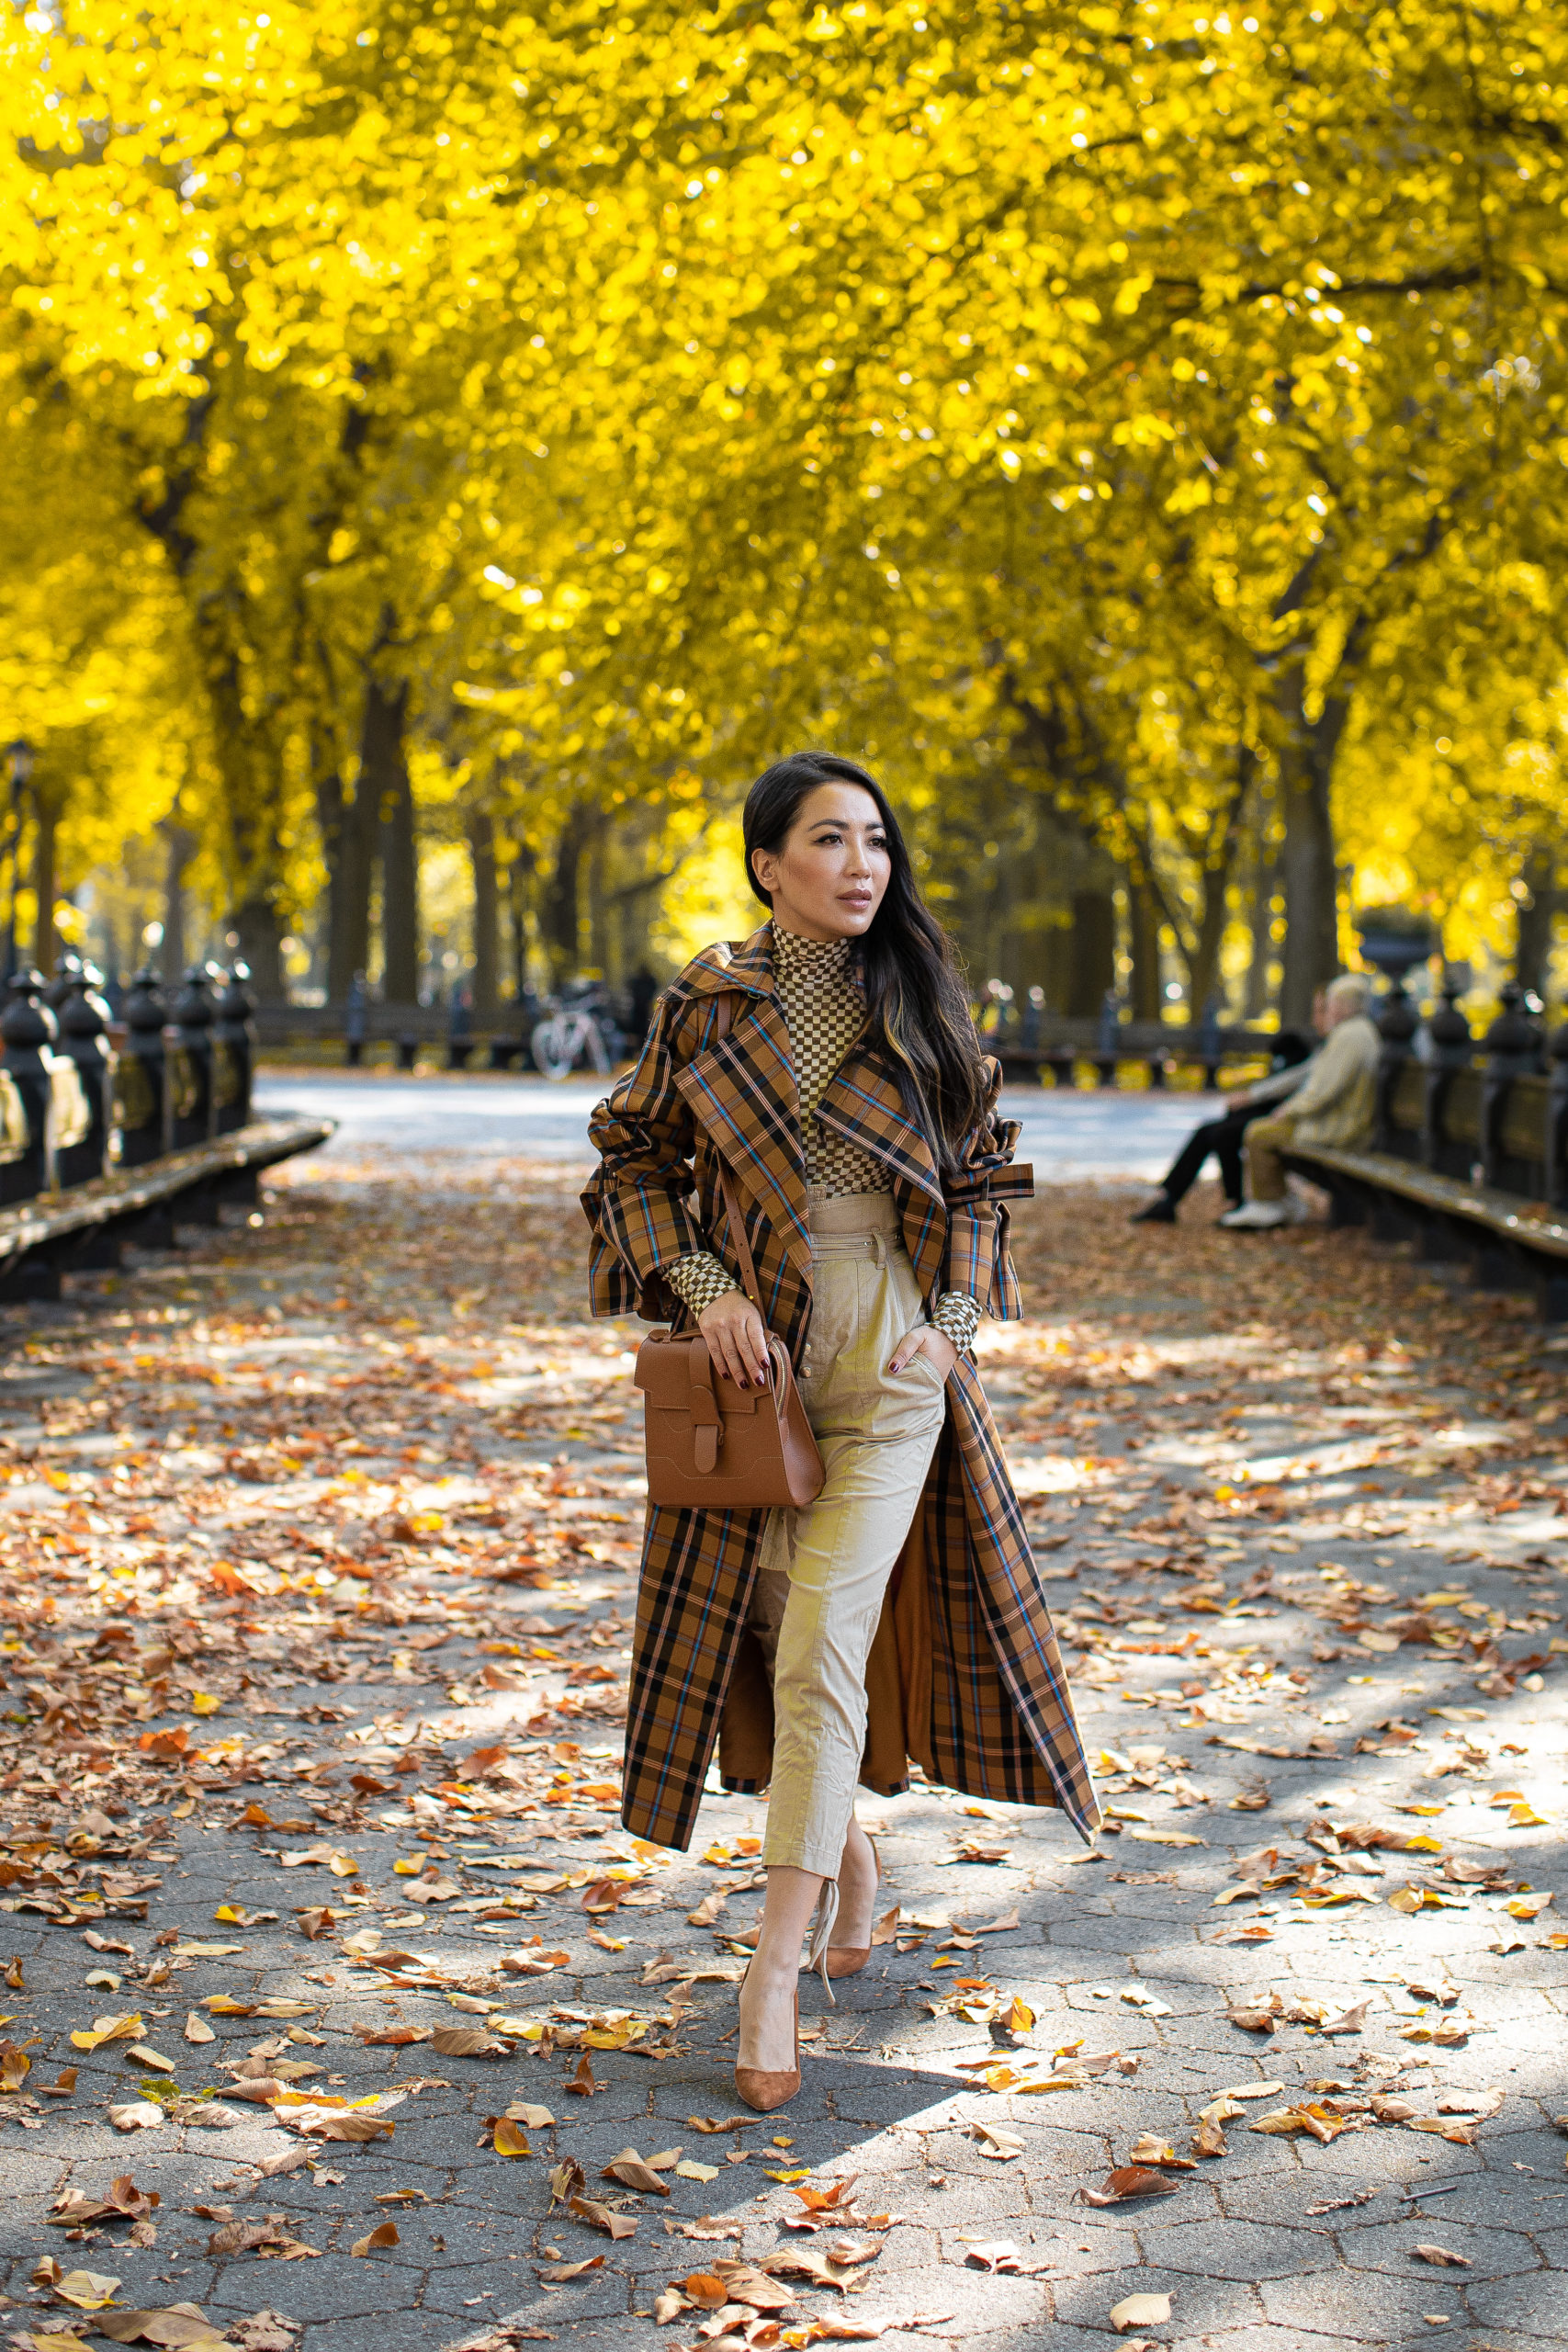 Autumn Looks in Shades of Chestnut and Rose - Wendy's Lookbook